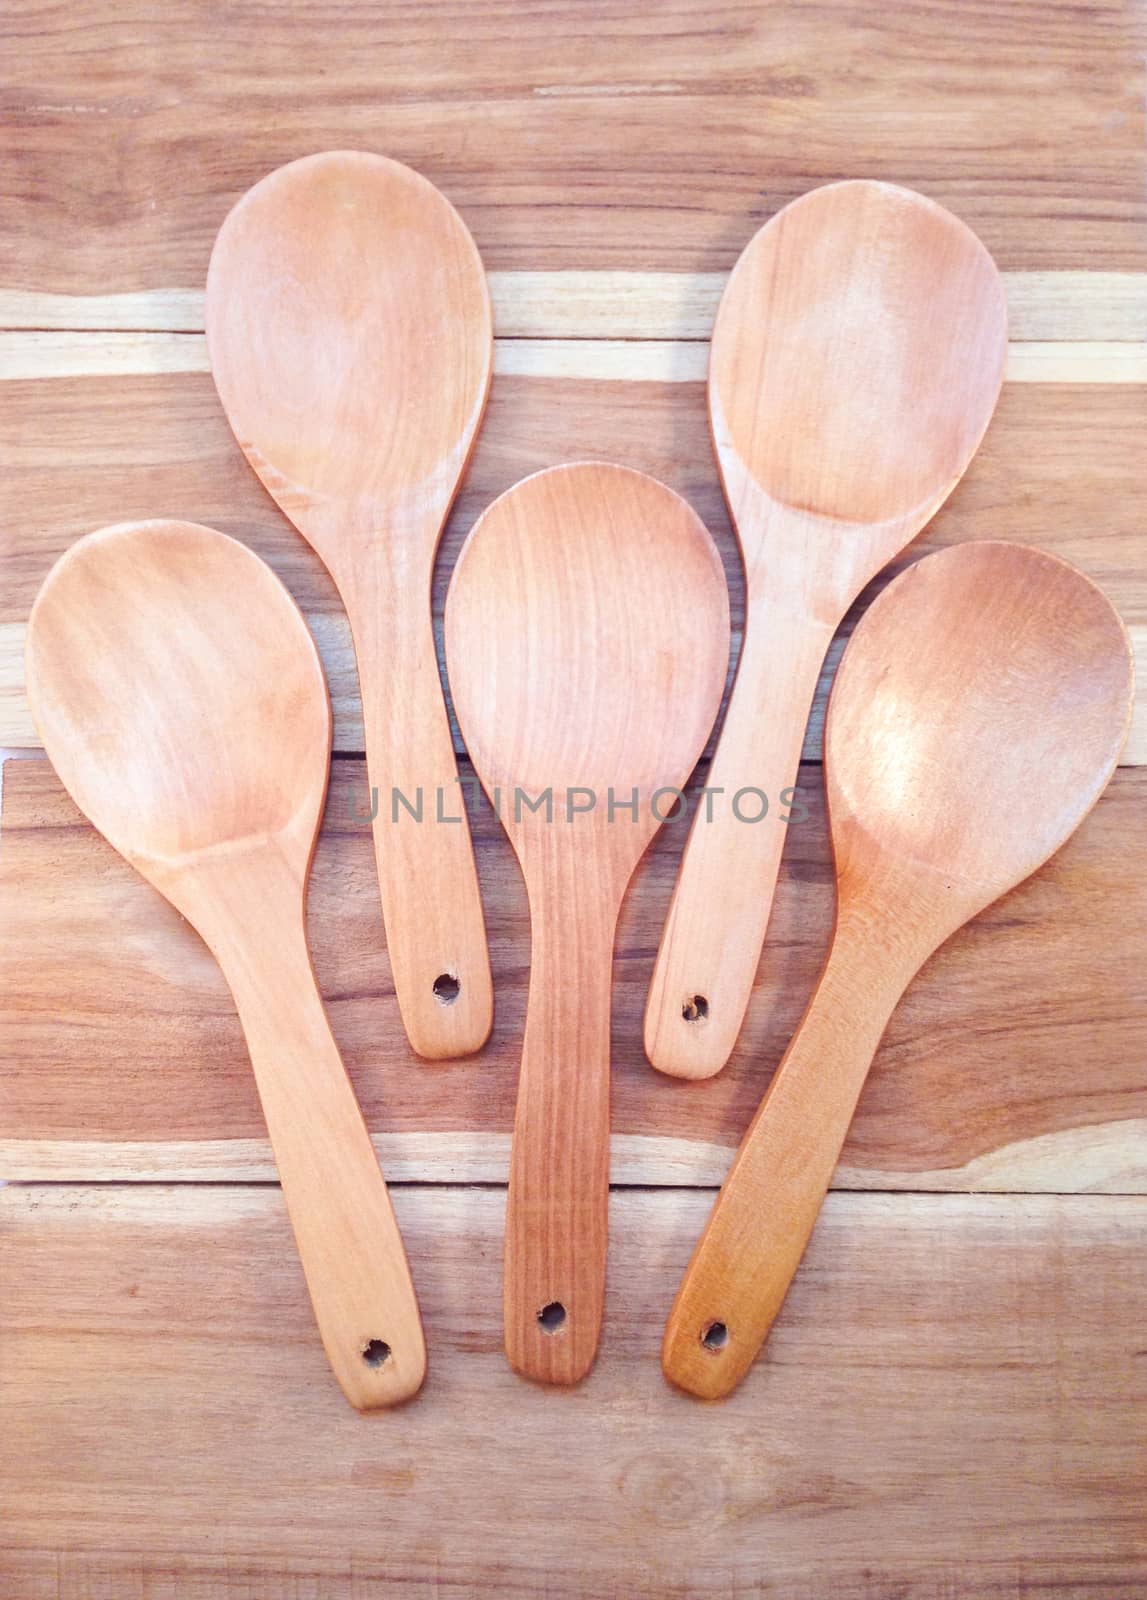 Wooden ladle on wooden background by Bowonpat